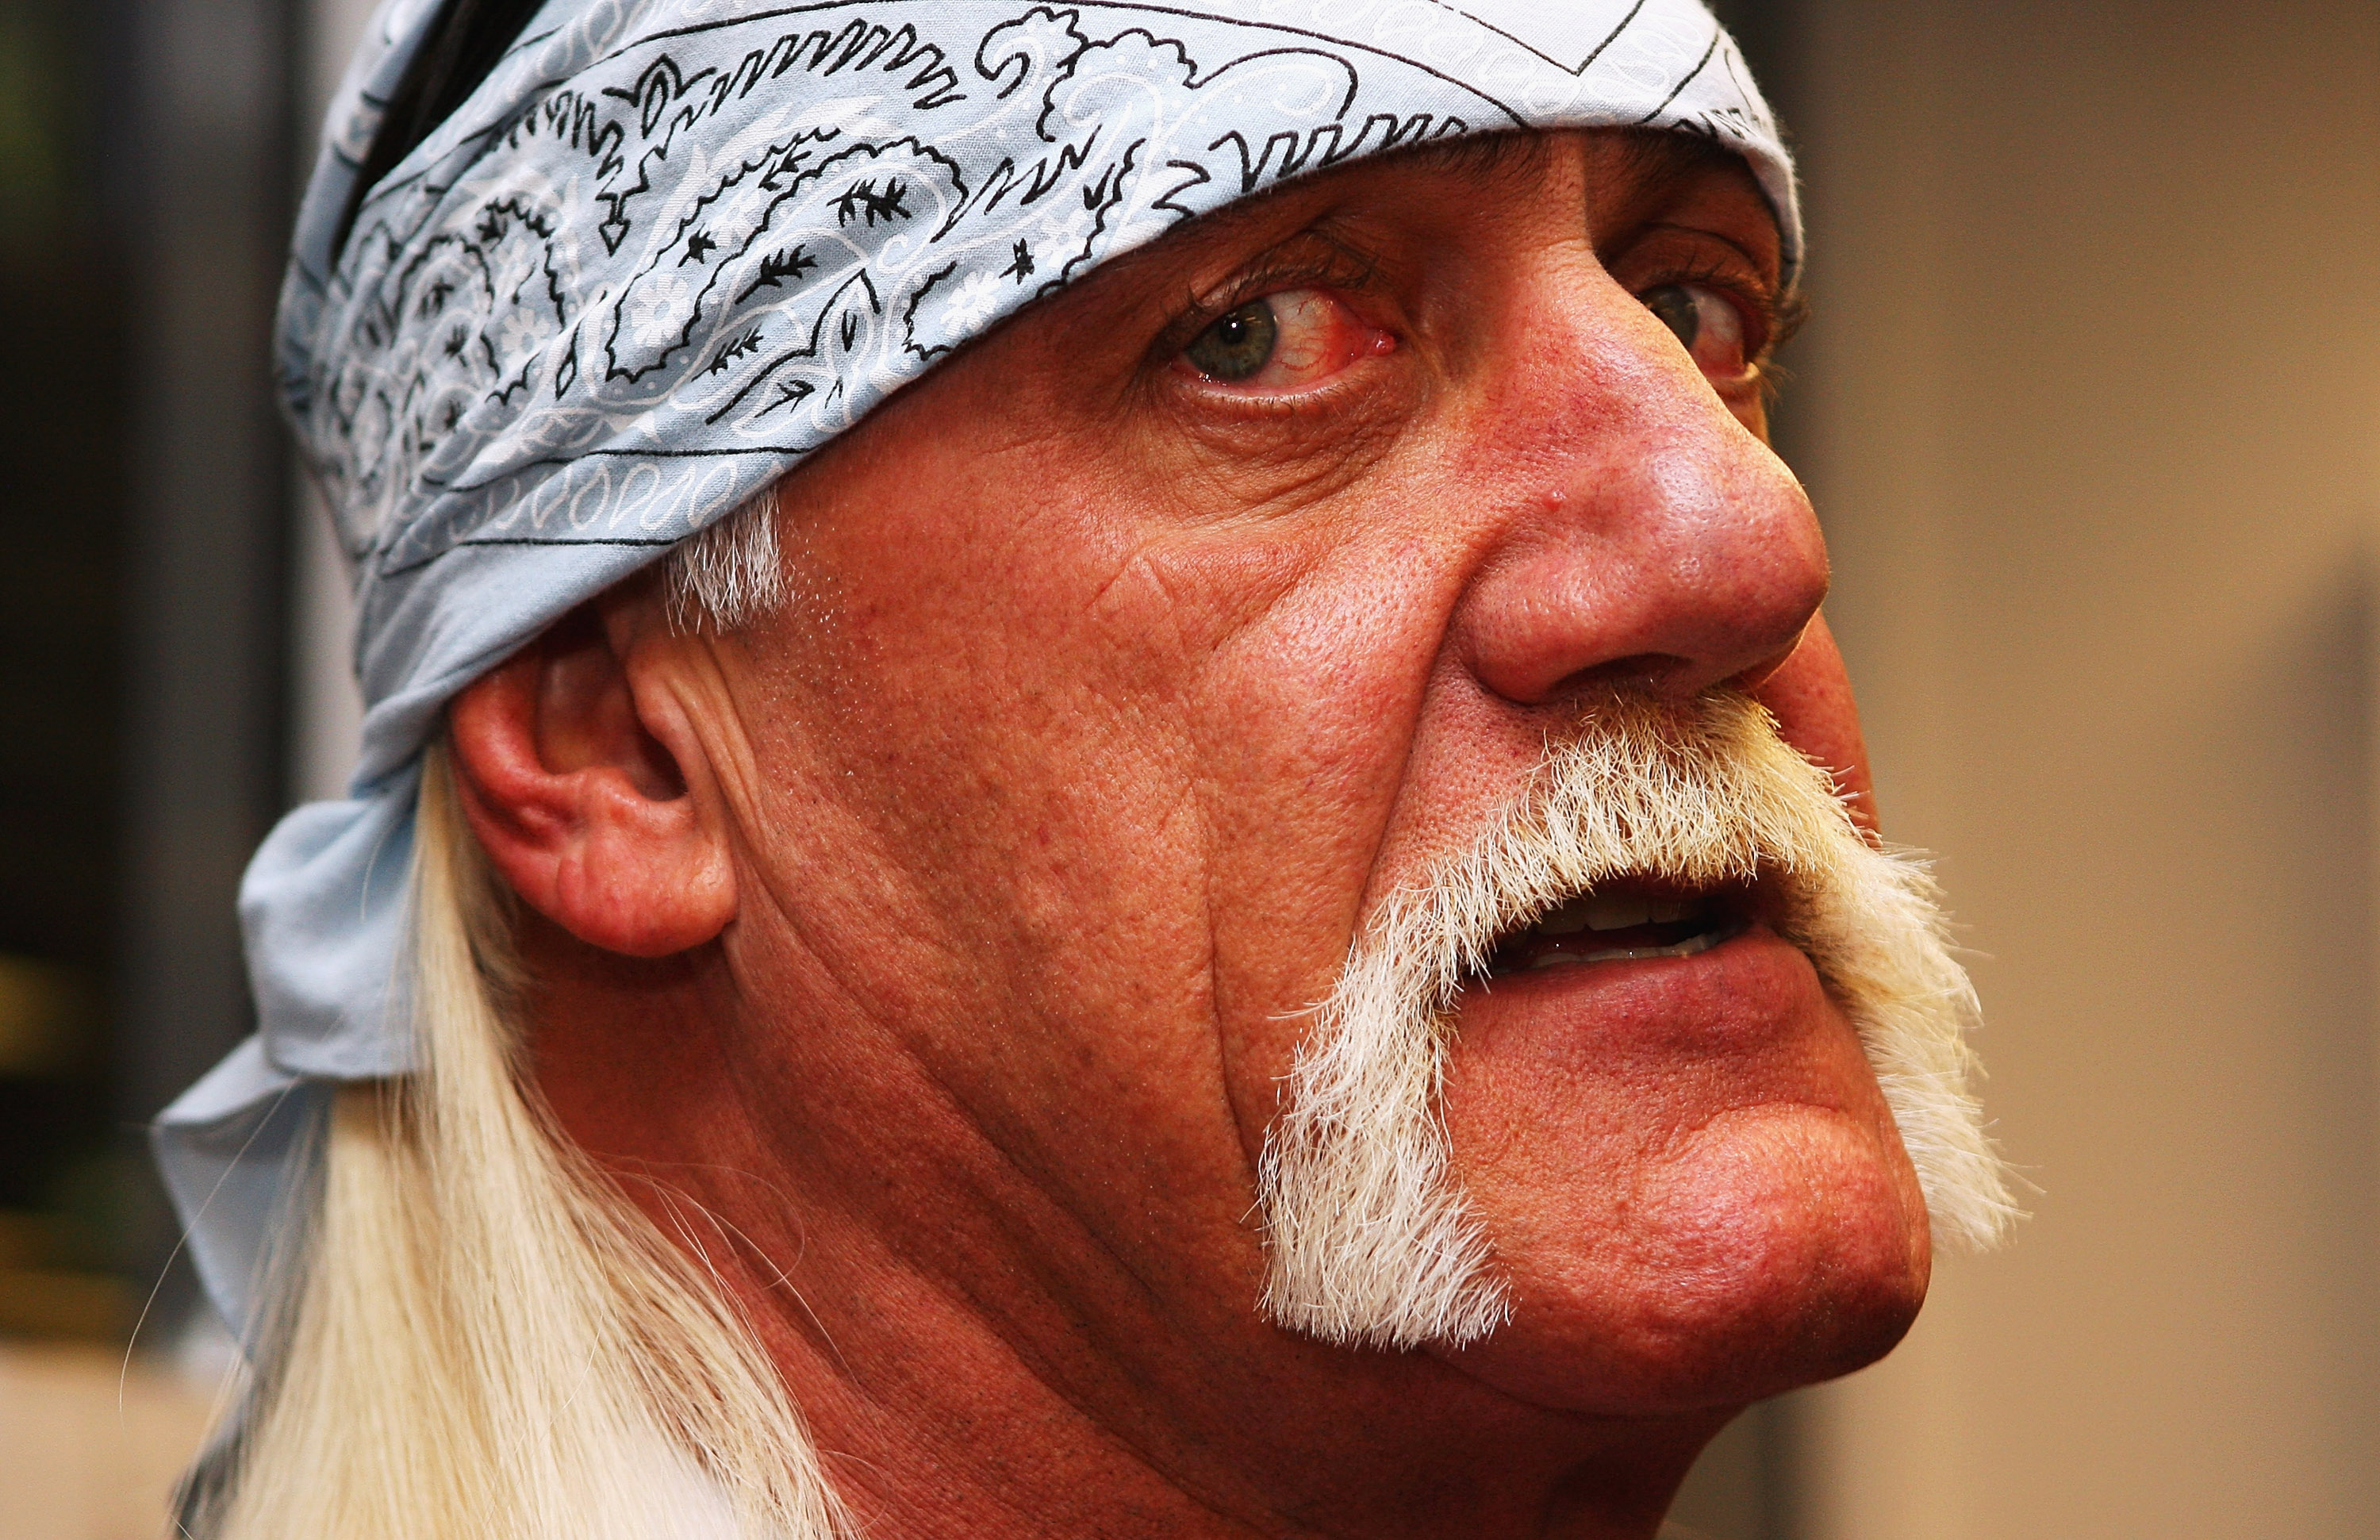 SYDNEY, AUSTRALIA - NOVEMBER 18:  Wrestler Hulk Hogan is interviewed during a media opportunity with Sydney Roosters players at Roosters Headquarters on November 18, 2009 in Sydney, Australia.  (Photo by Cameron Spencer/Getty Images)